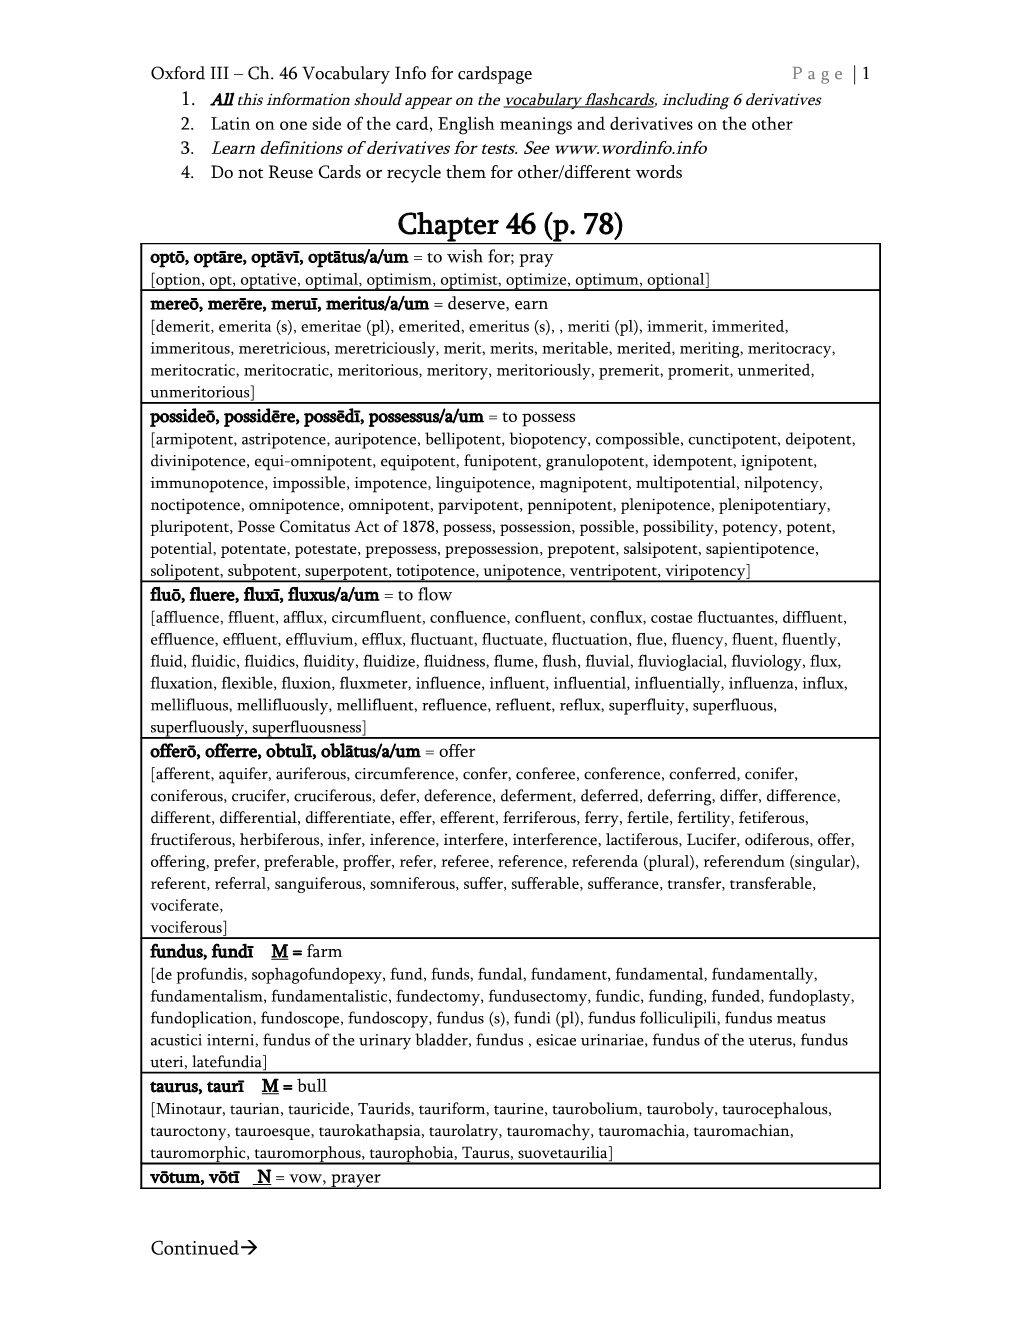 Oxford III Ch. 46 Vocabulary Info for Cards Page Page 1